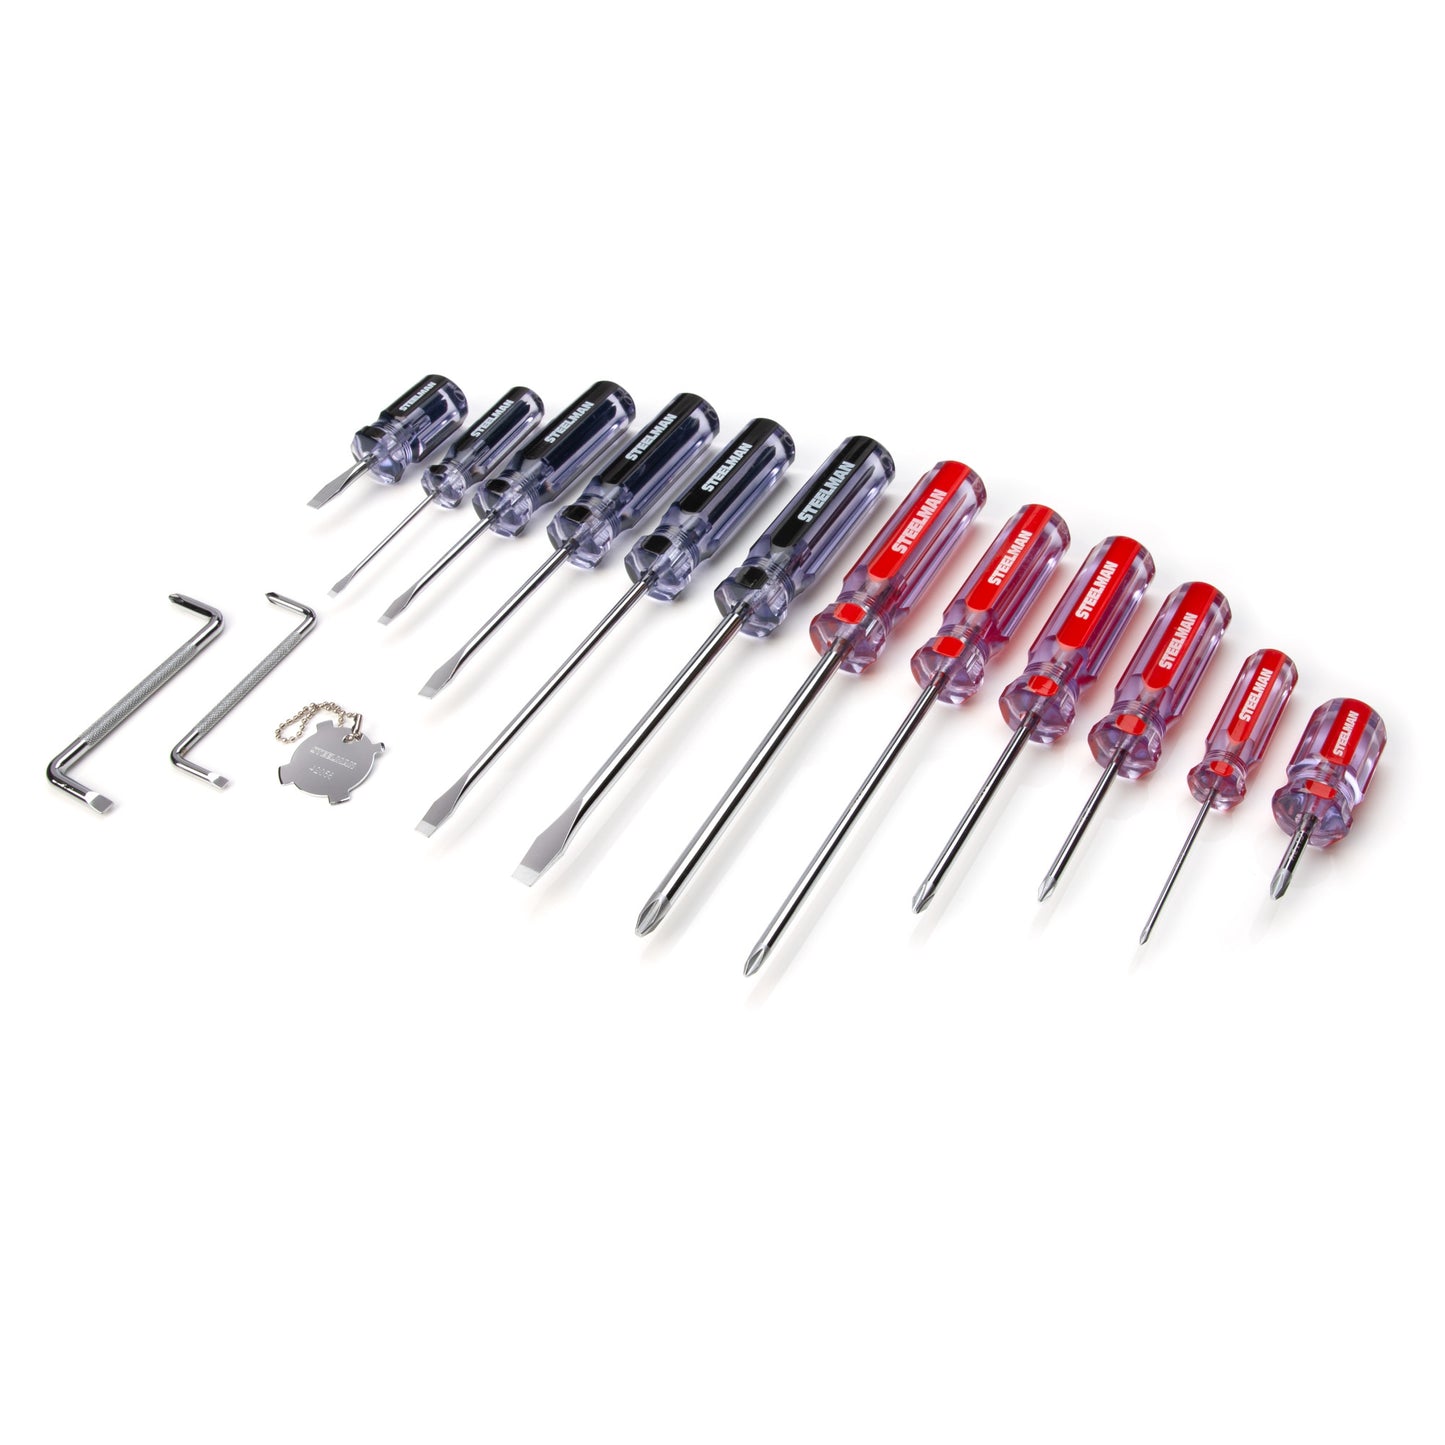 16-Piece Clear Handle Slotted and Phillips Head Screwdriver Set